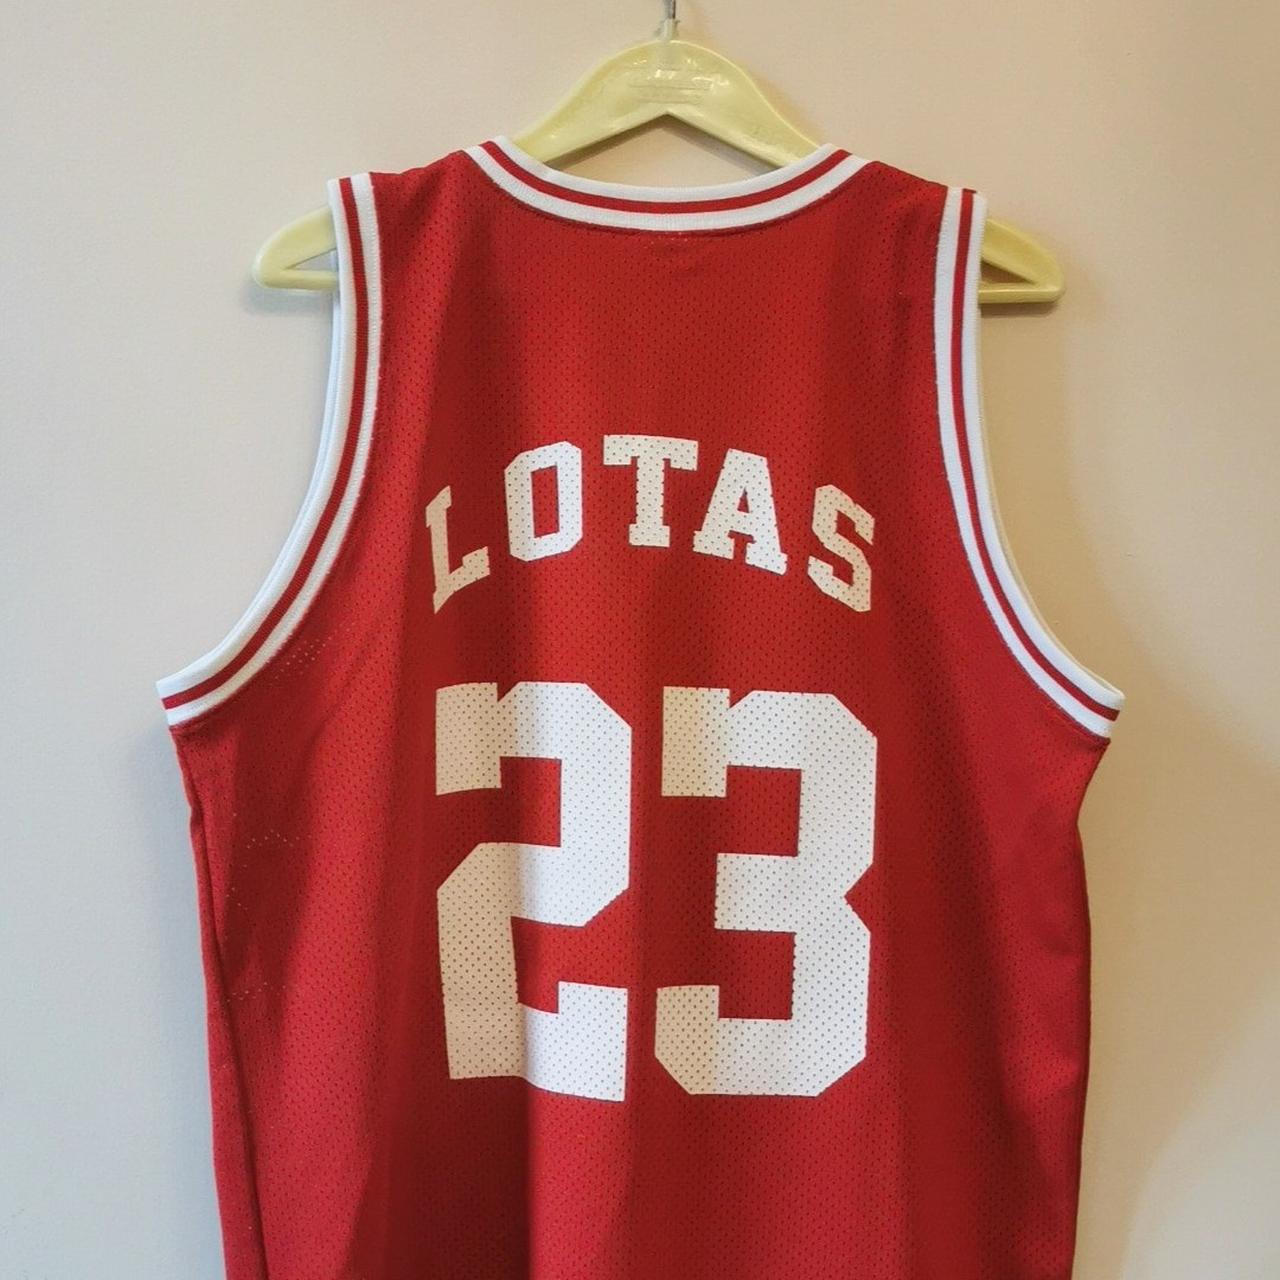 Warren Lotas Chicago Bulls Jersey, Size S, From old